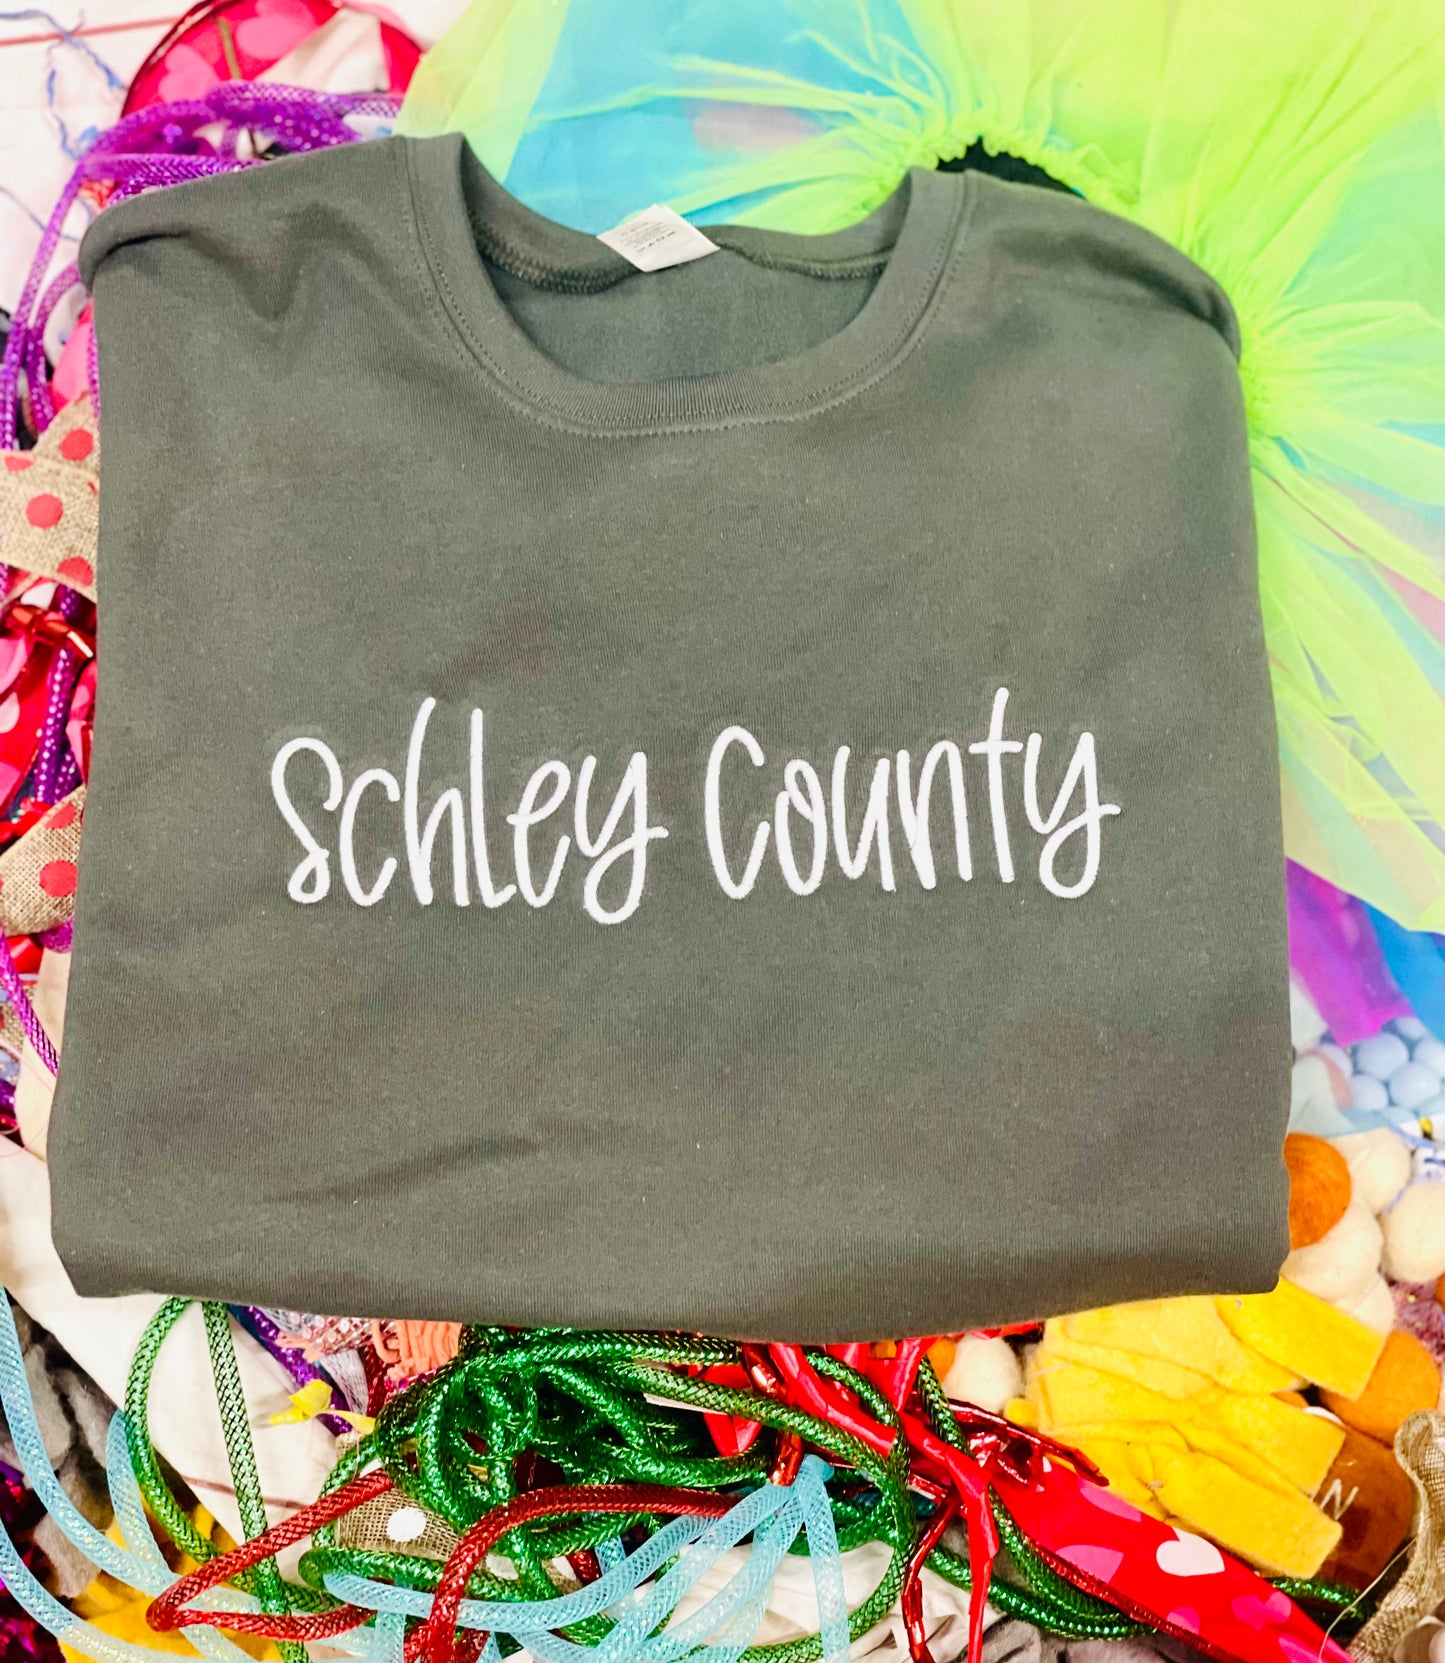 Team Embroidered Shirt Schley County. Any color or school